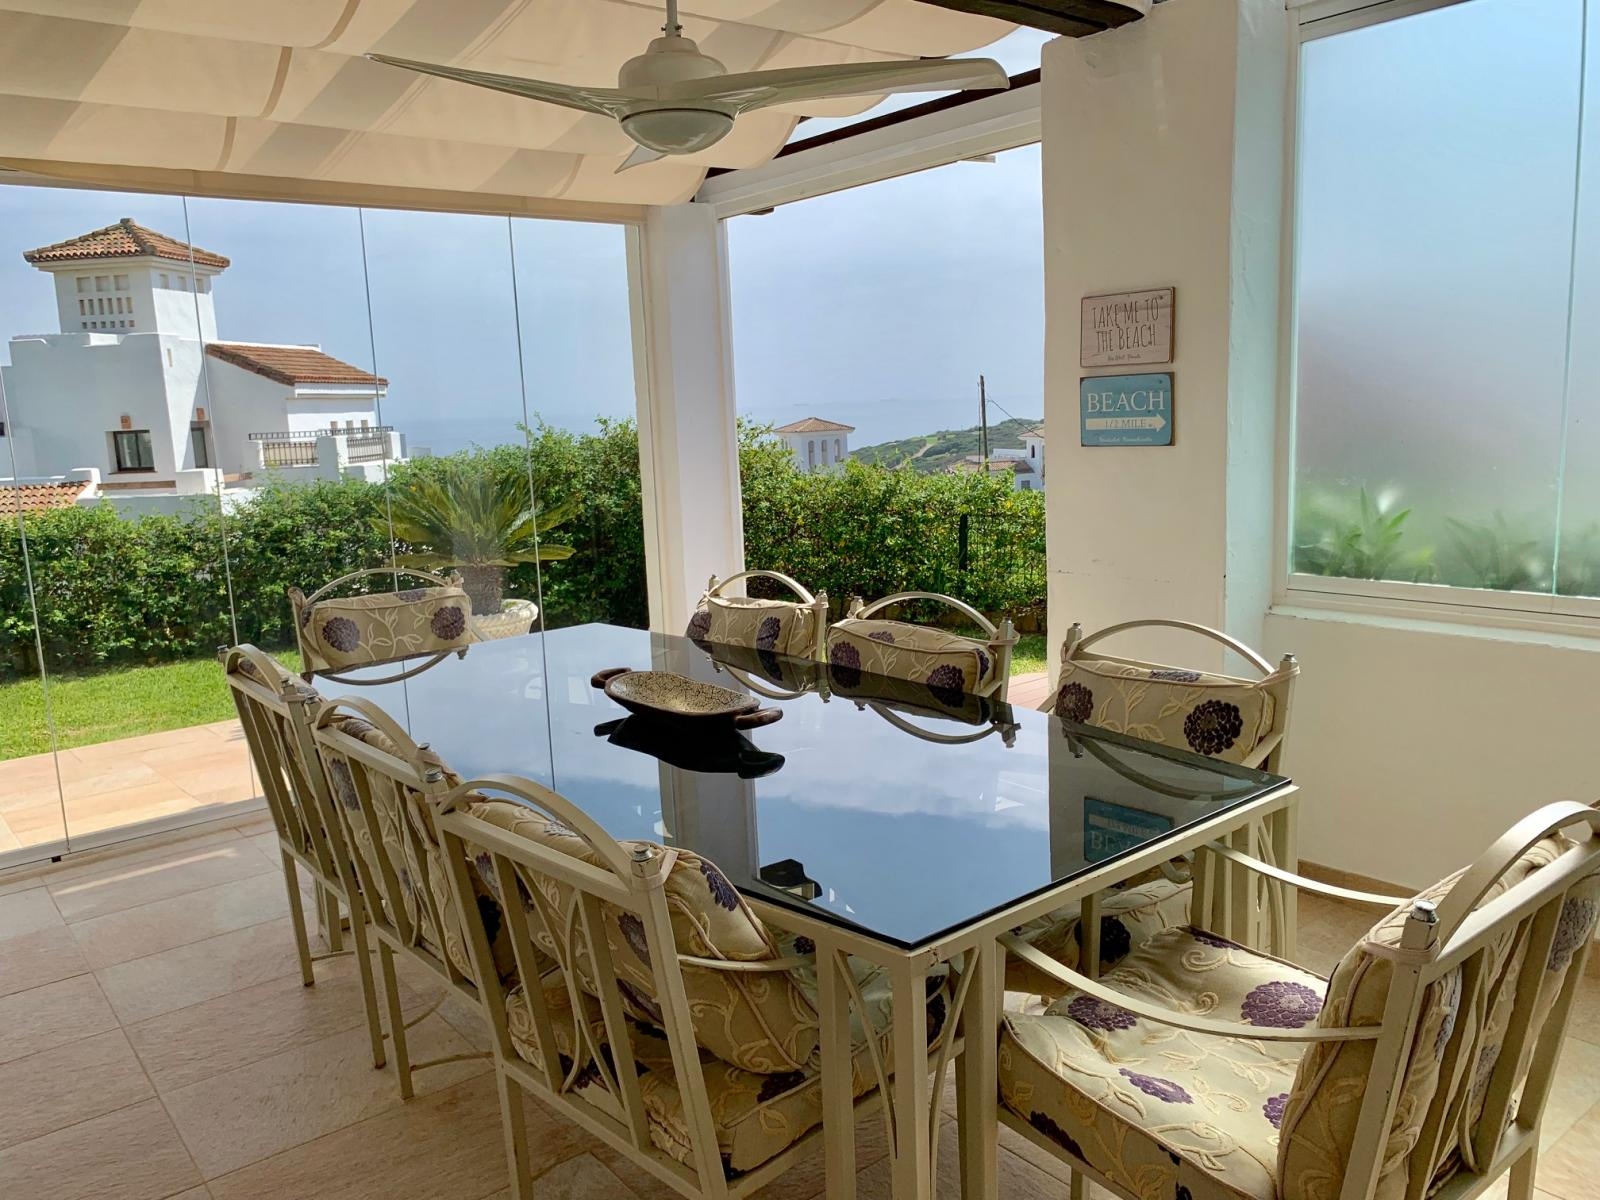 Splendid townhouse with spectacular views in Alcaidesa